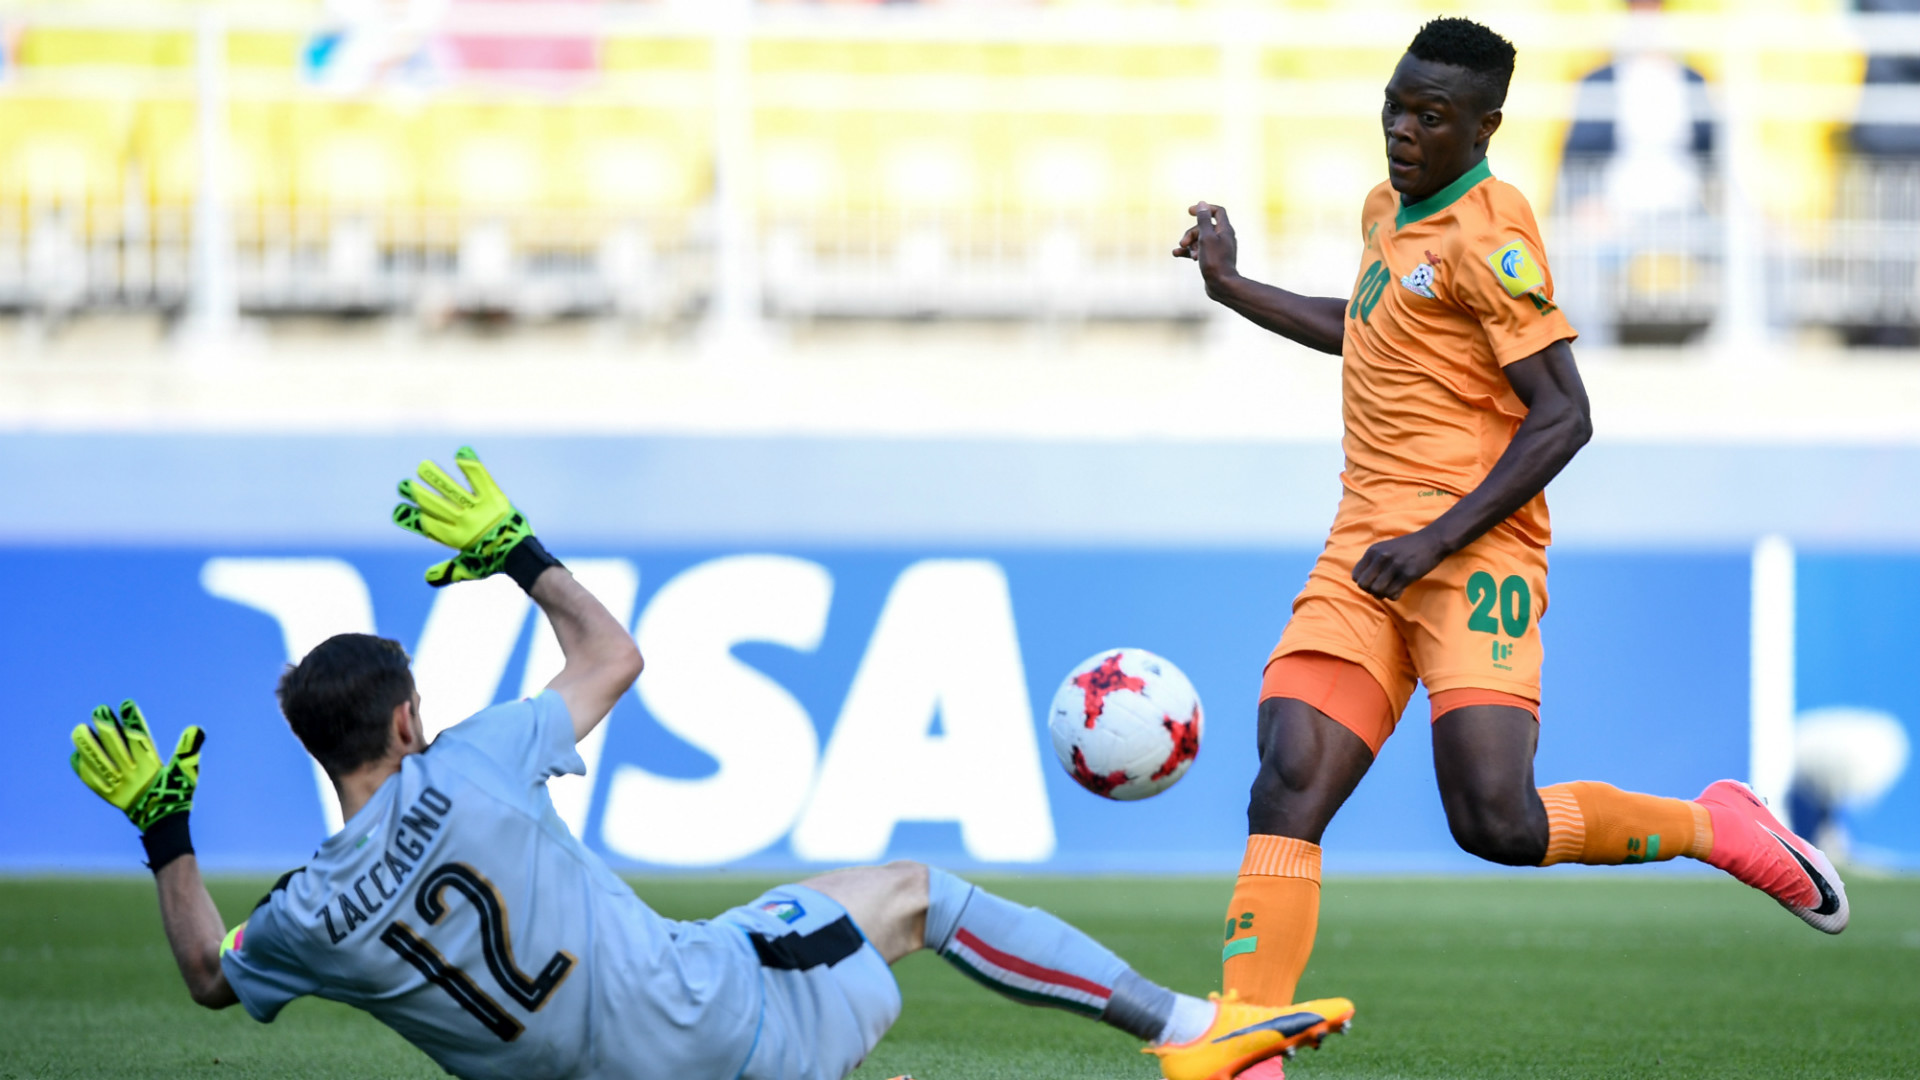 It's a great feeling' - Zambia's Patson Daka on Caf African Youth Player  award nomination | Goal.com Tanzania